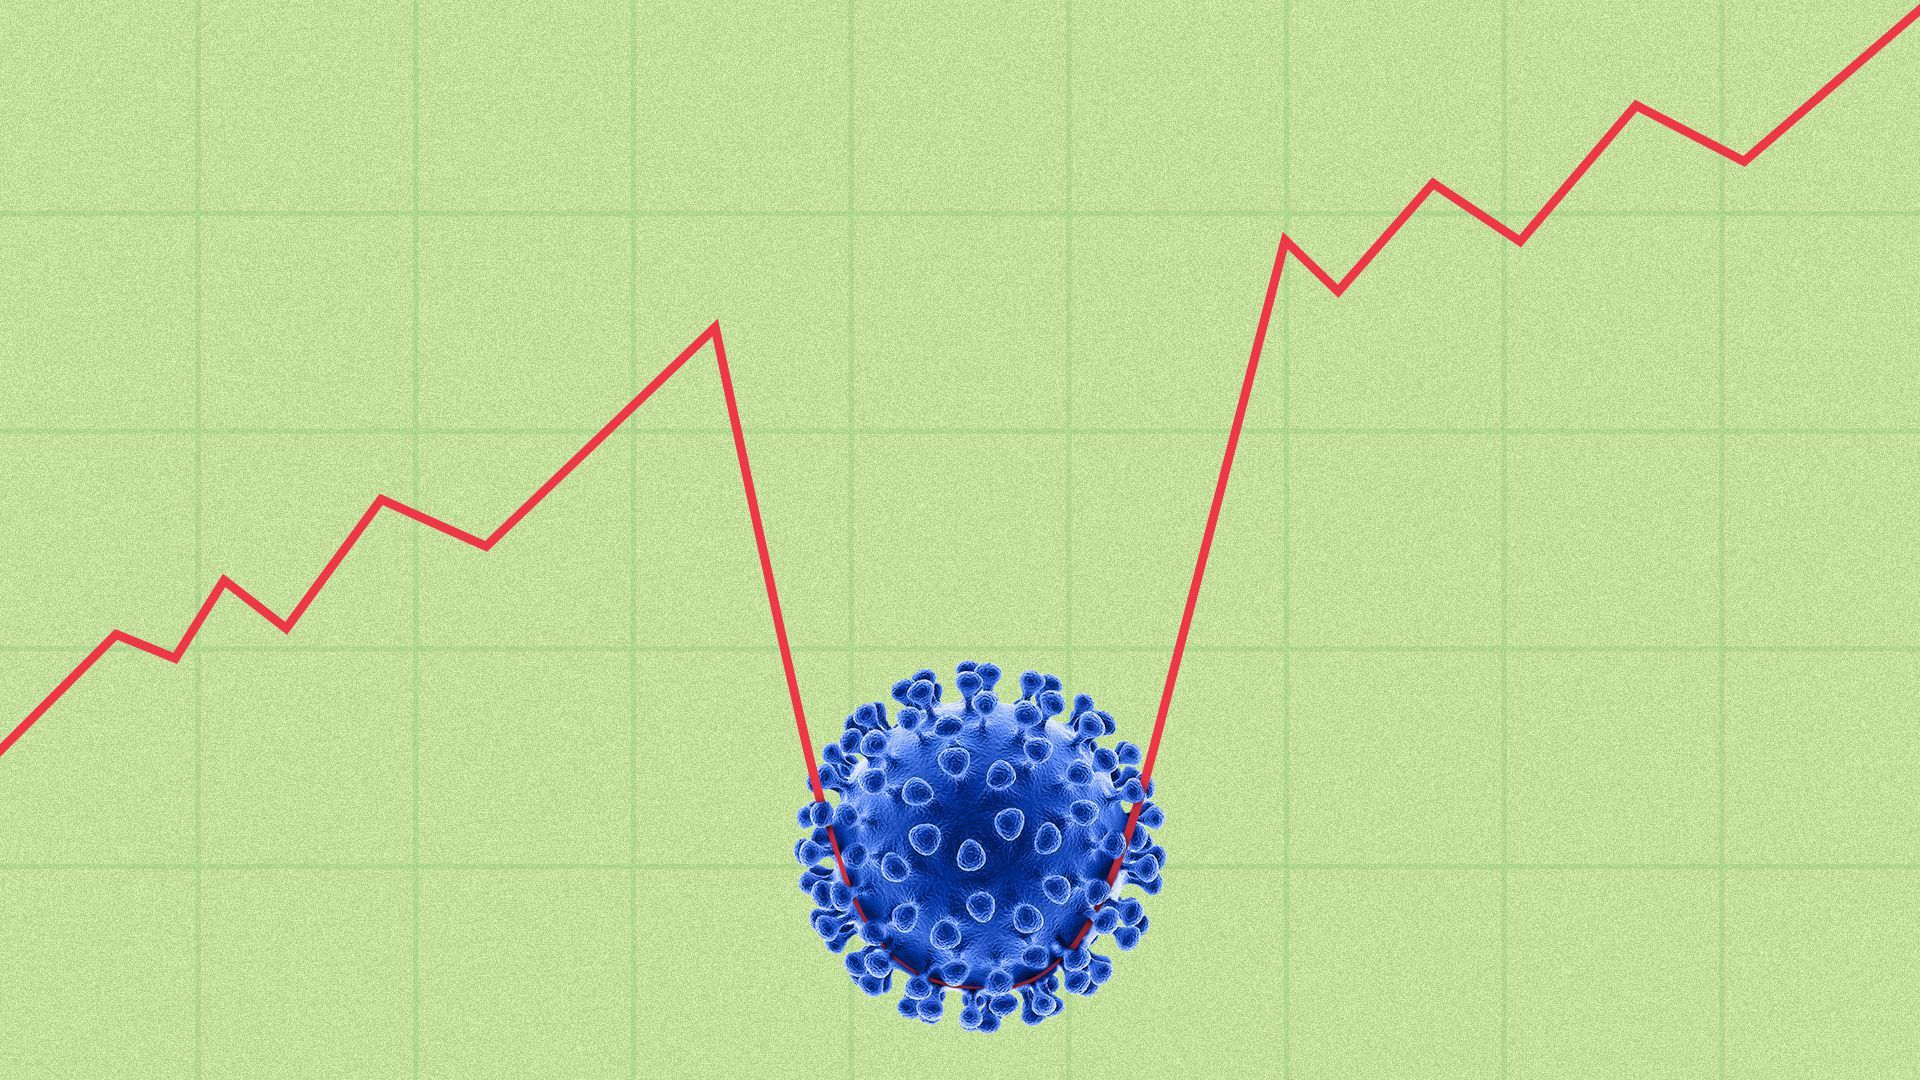 Illustration of a stock market graph with a trough holding a Covid-19 virus.